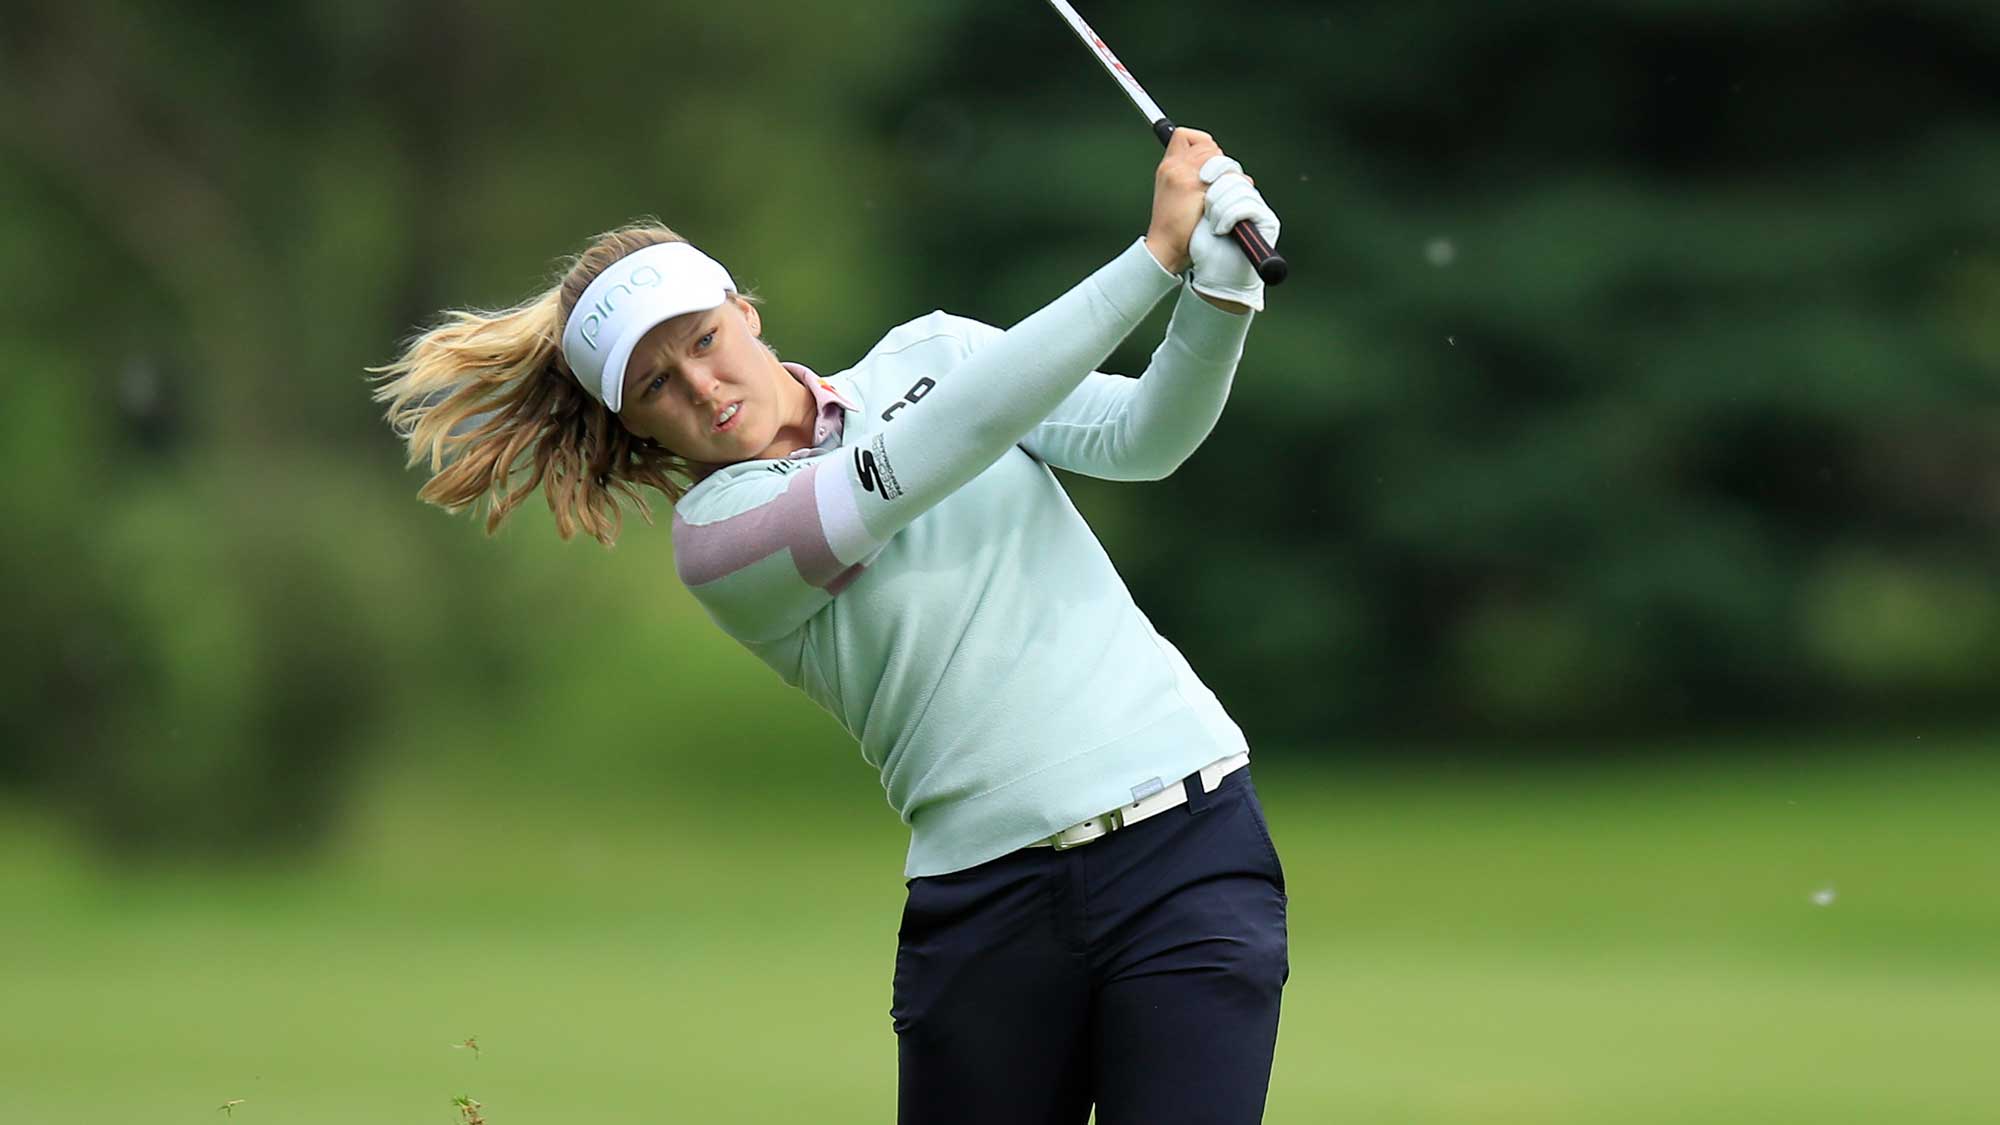 2019 Henderson leads after first round completed at Meijer LPGA Classic ...